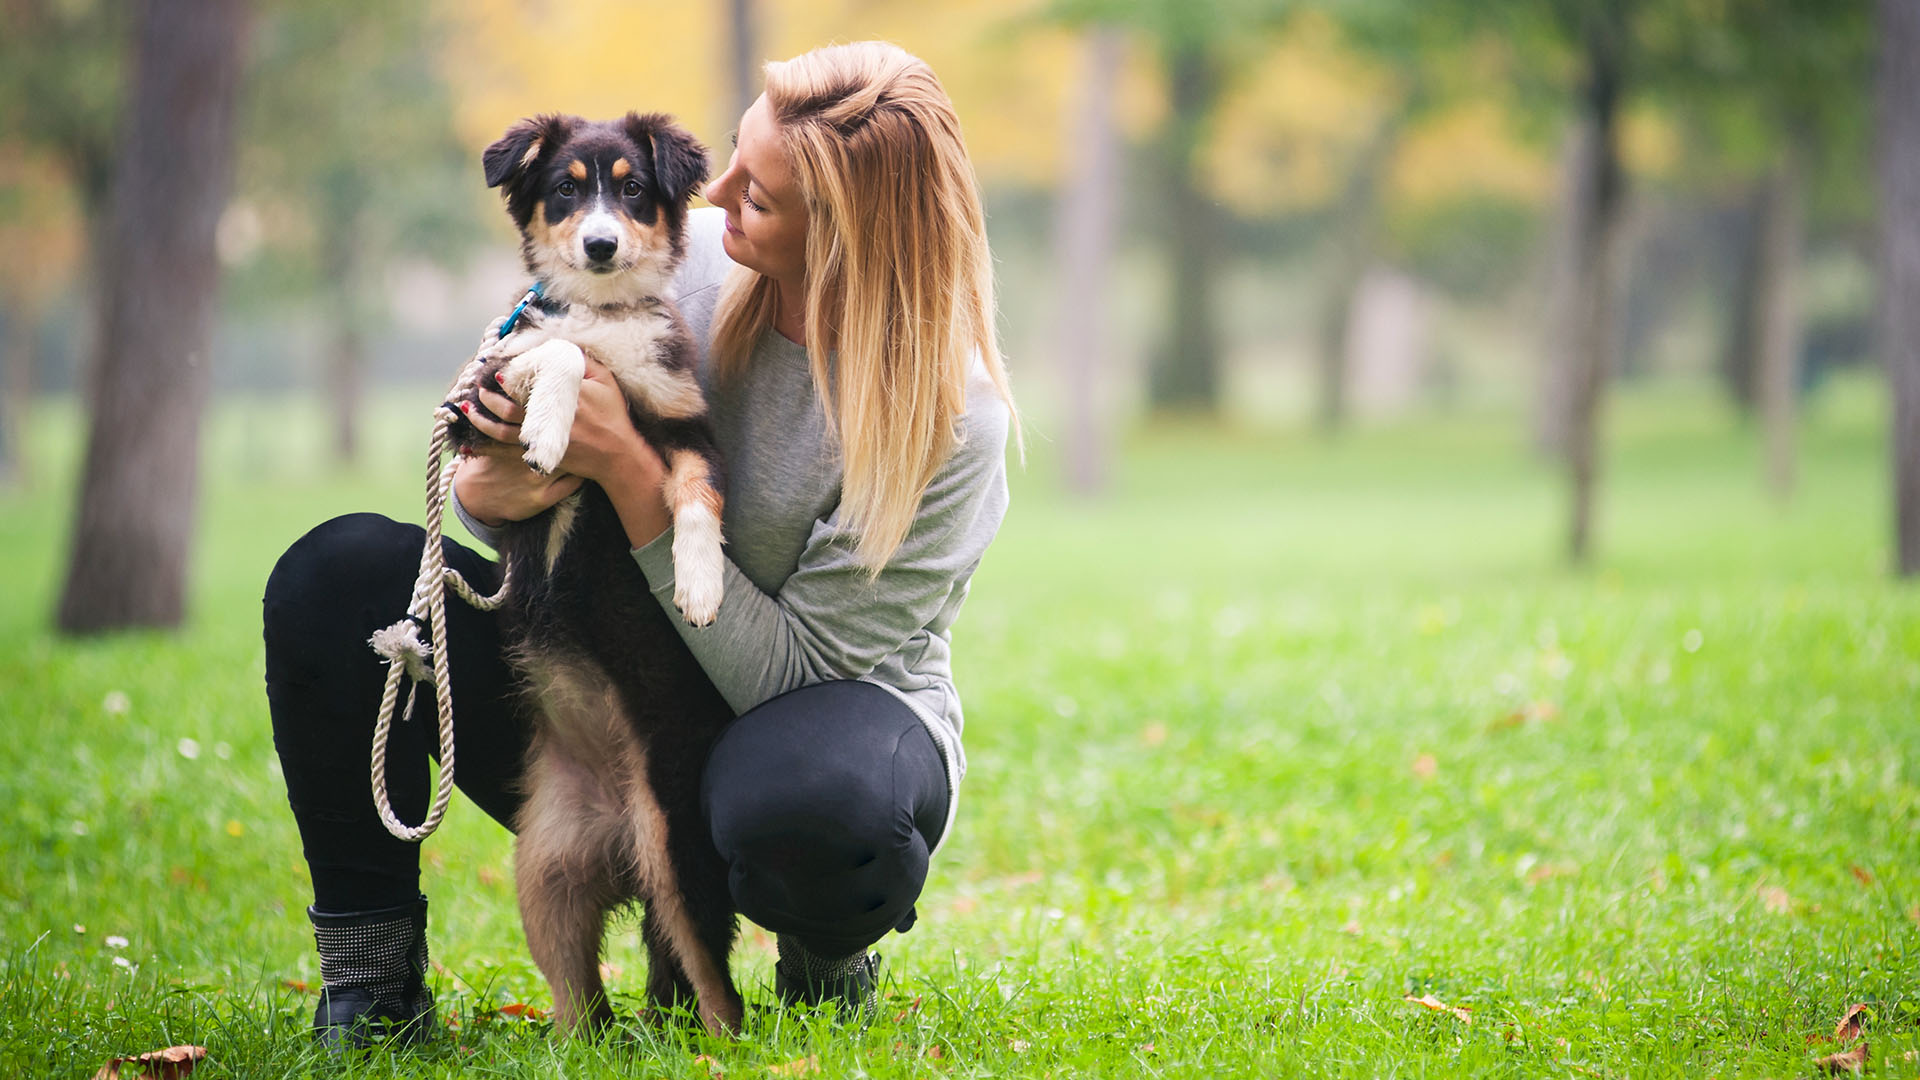 5 easy ways to exercise with your pet